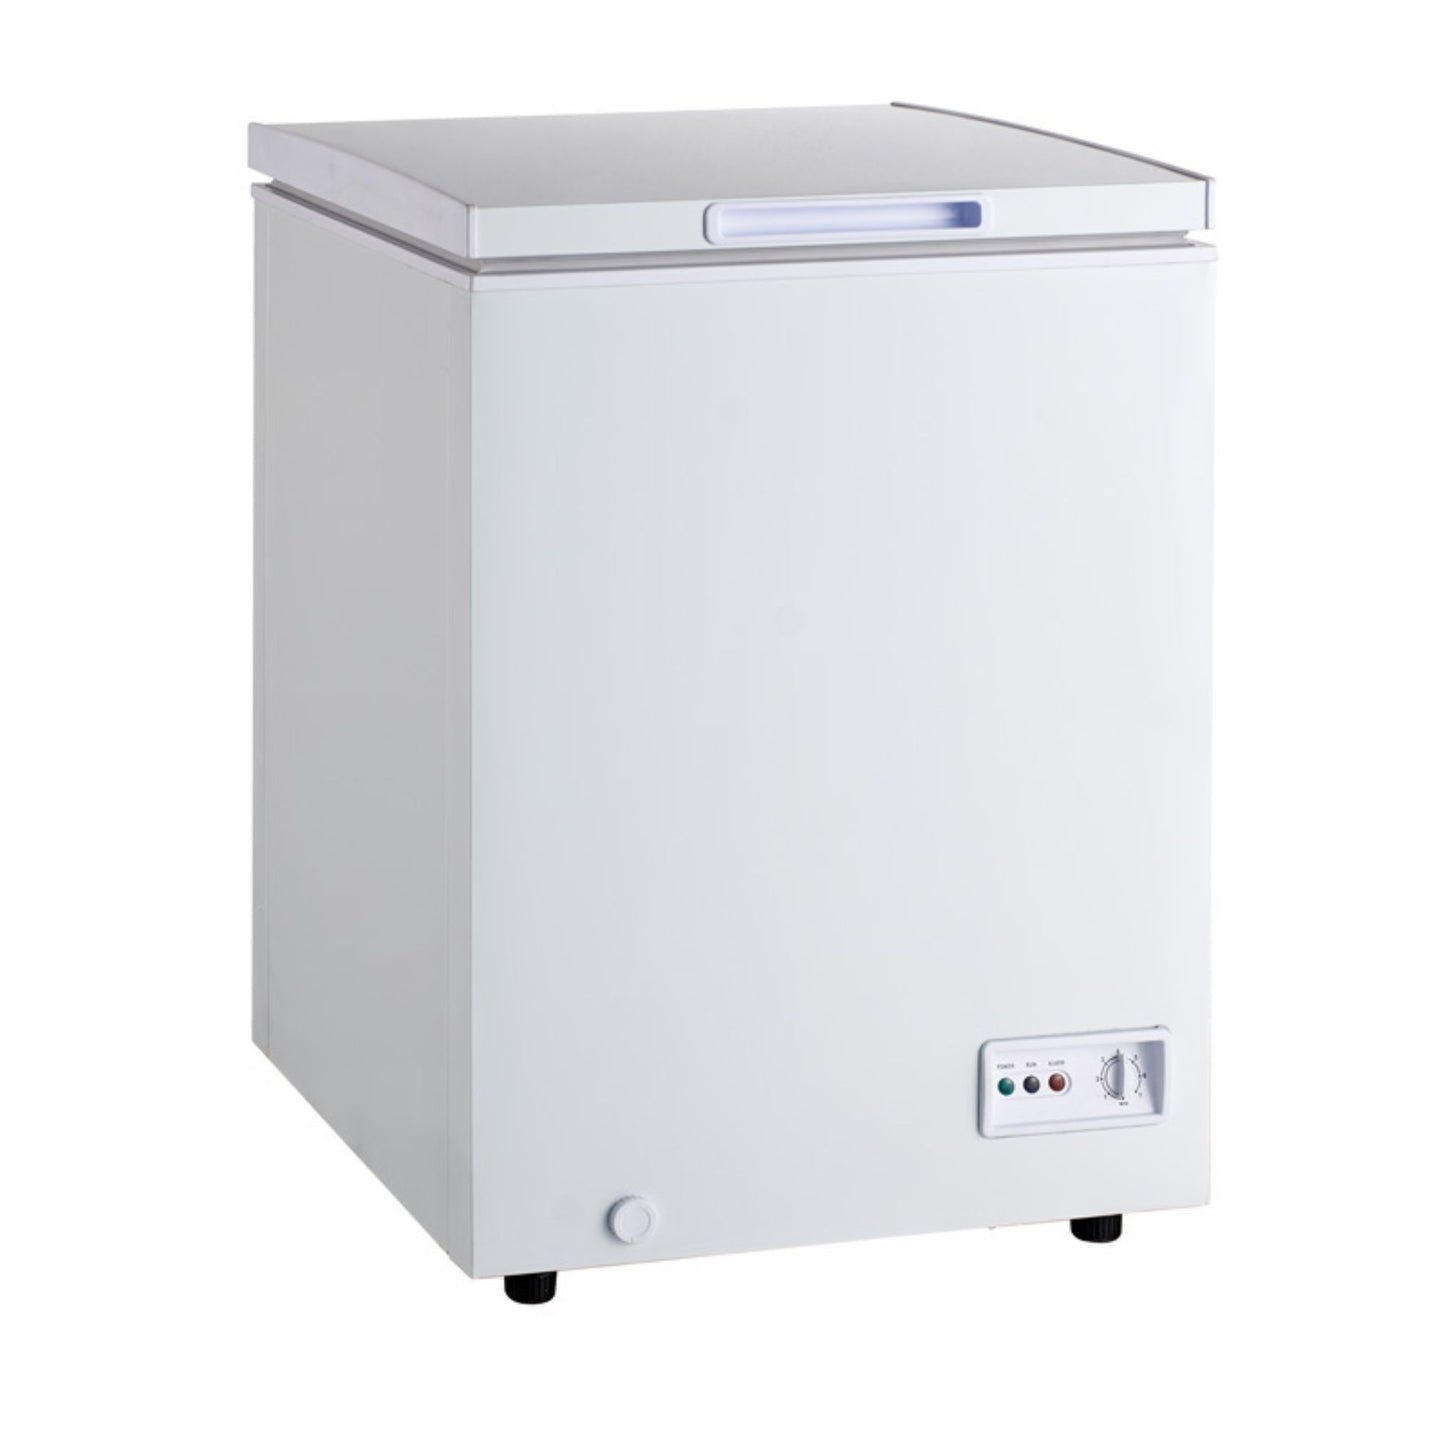 OMCAN 30'' CHEST FREEZER (SOLID FLAT TOP)